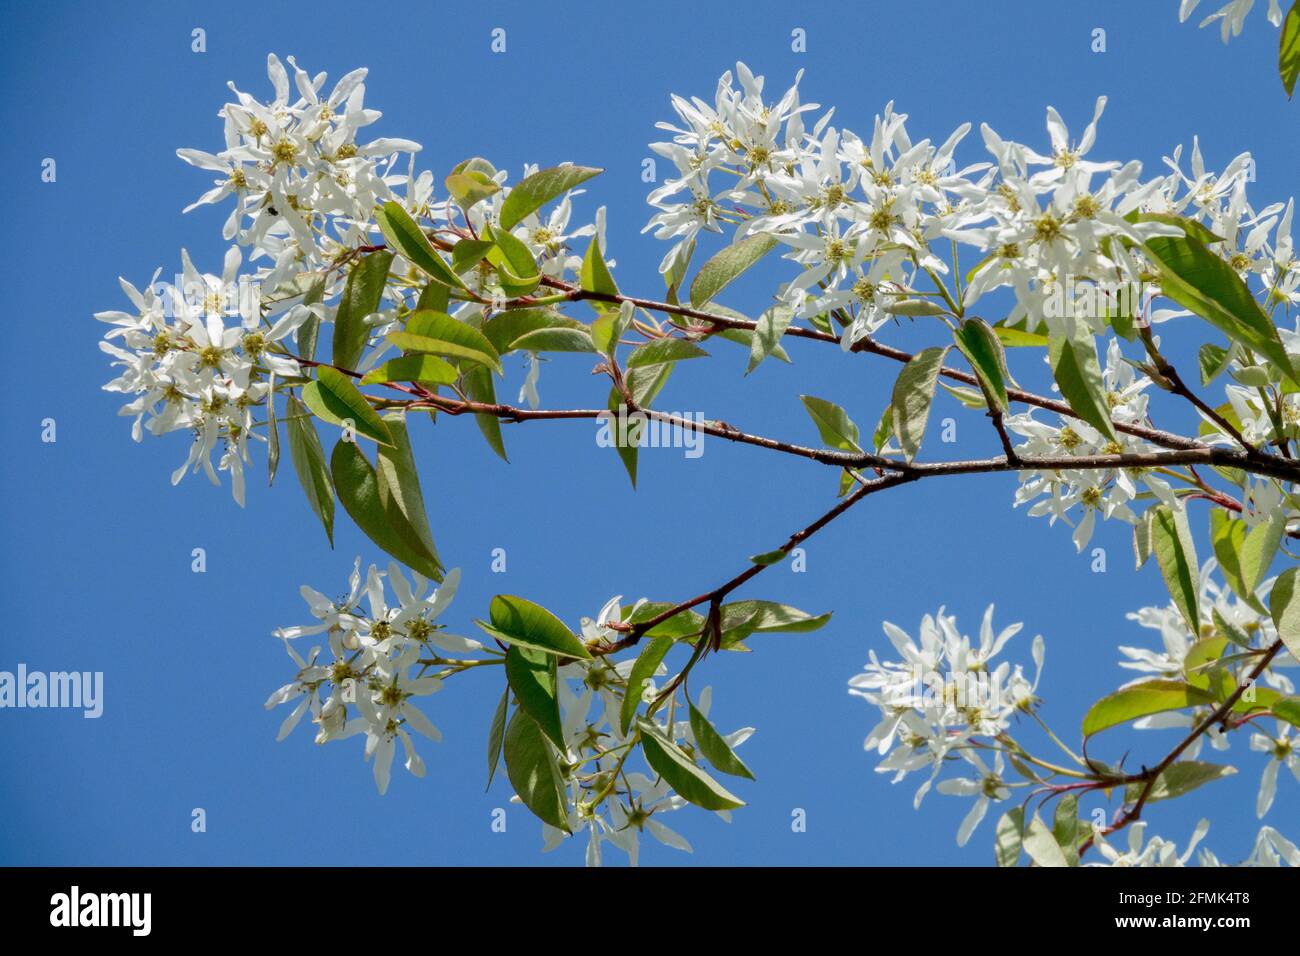 Showy white flowers in early spring Amelanchier lamarckii Snowy mespilus Stock Photo